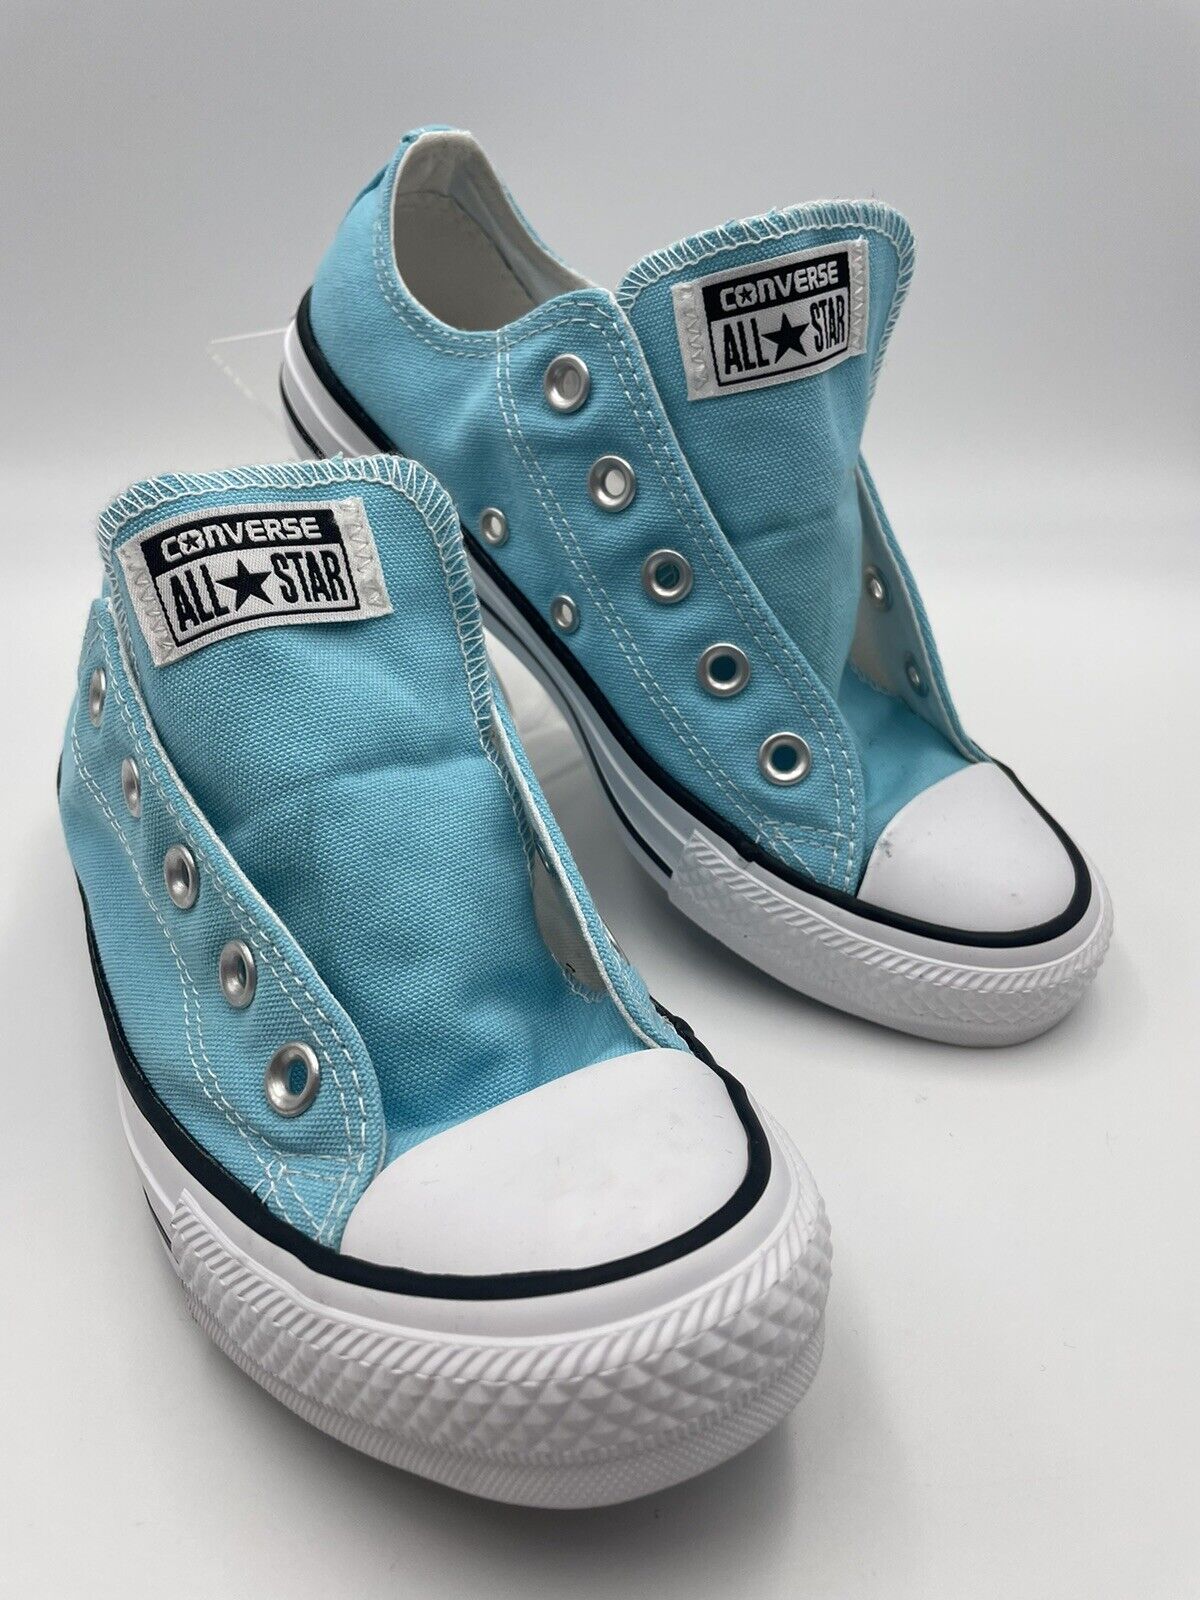 Converse All Star Chuck Taylor Low Top Blue Dainty Canvas Sneakers Size M 4  W 6 | eBay